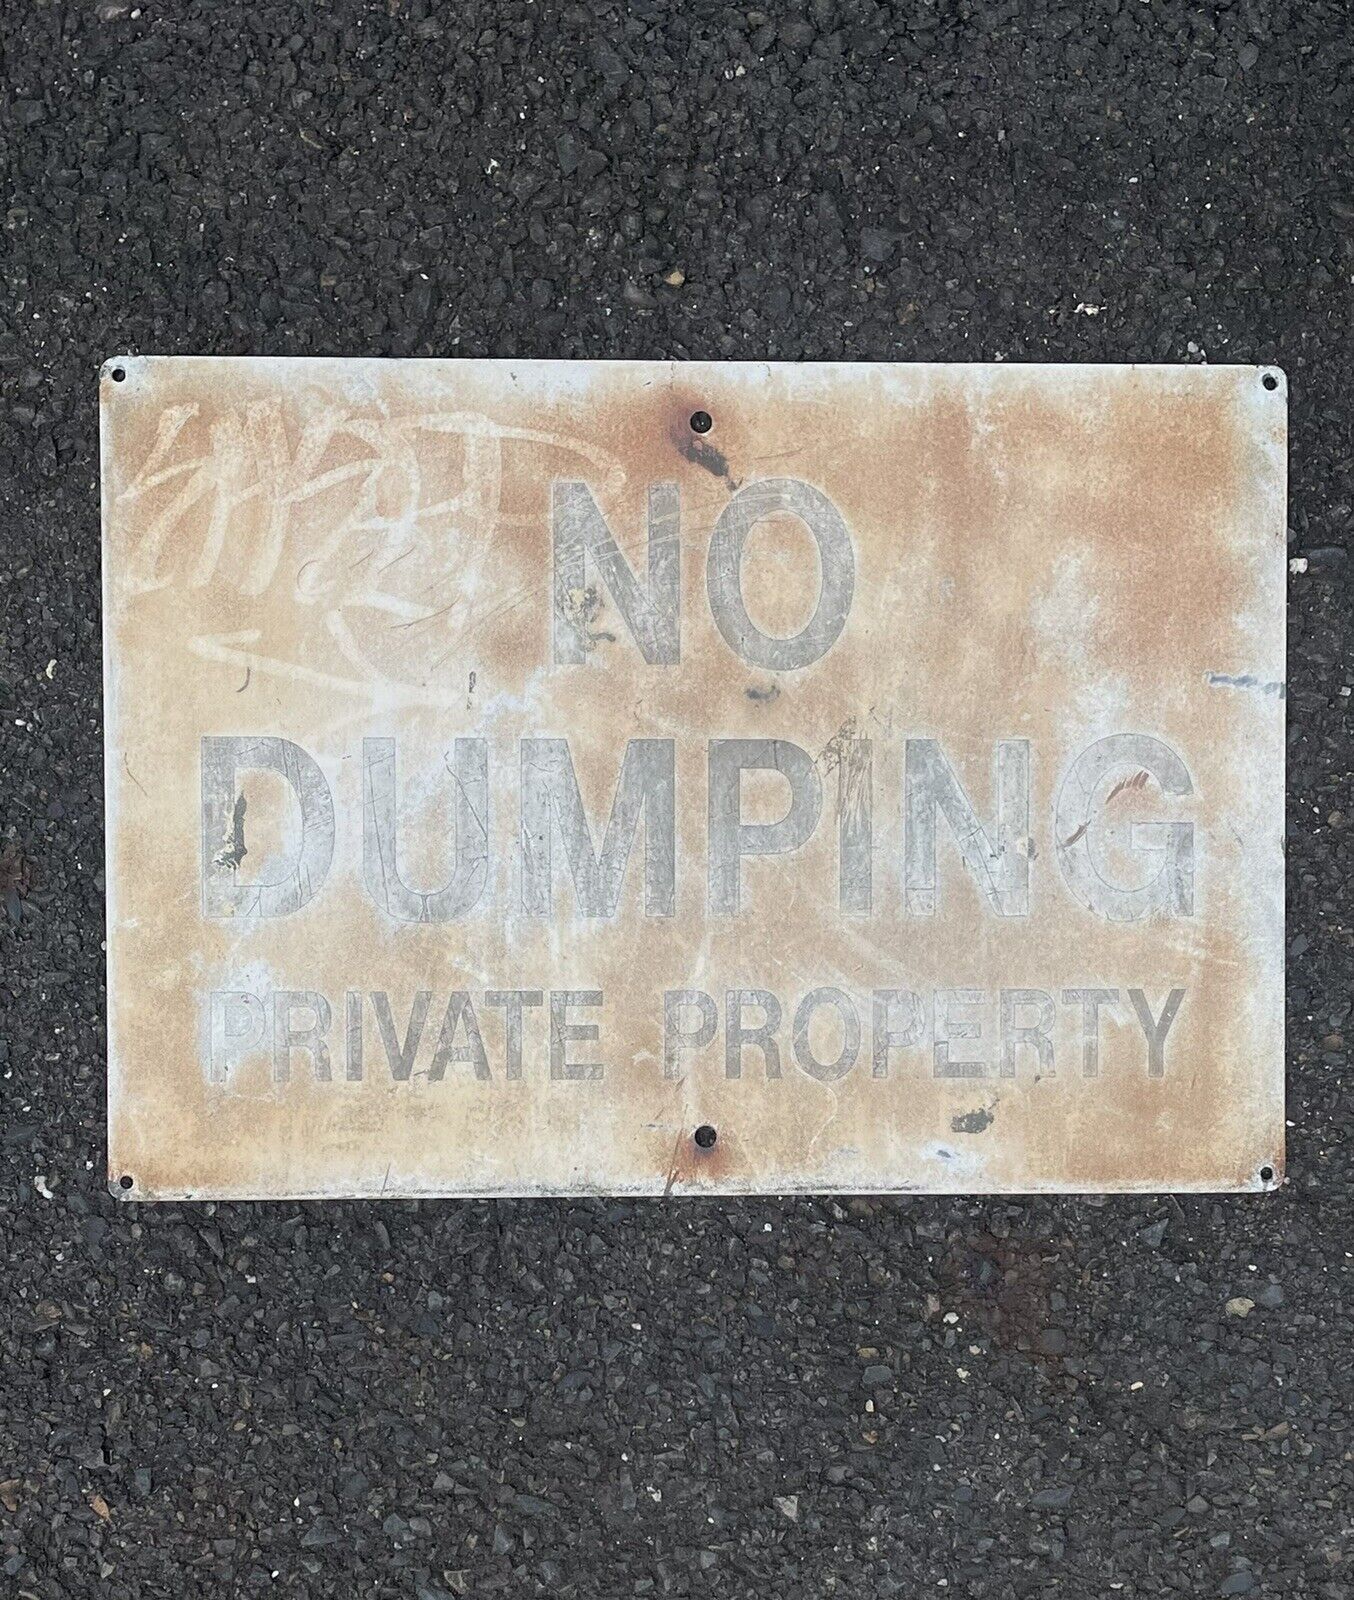 Vintage Metal Sign - No Dumping Private Property Faded Industrial 20x14” Sign R